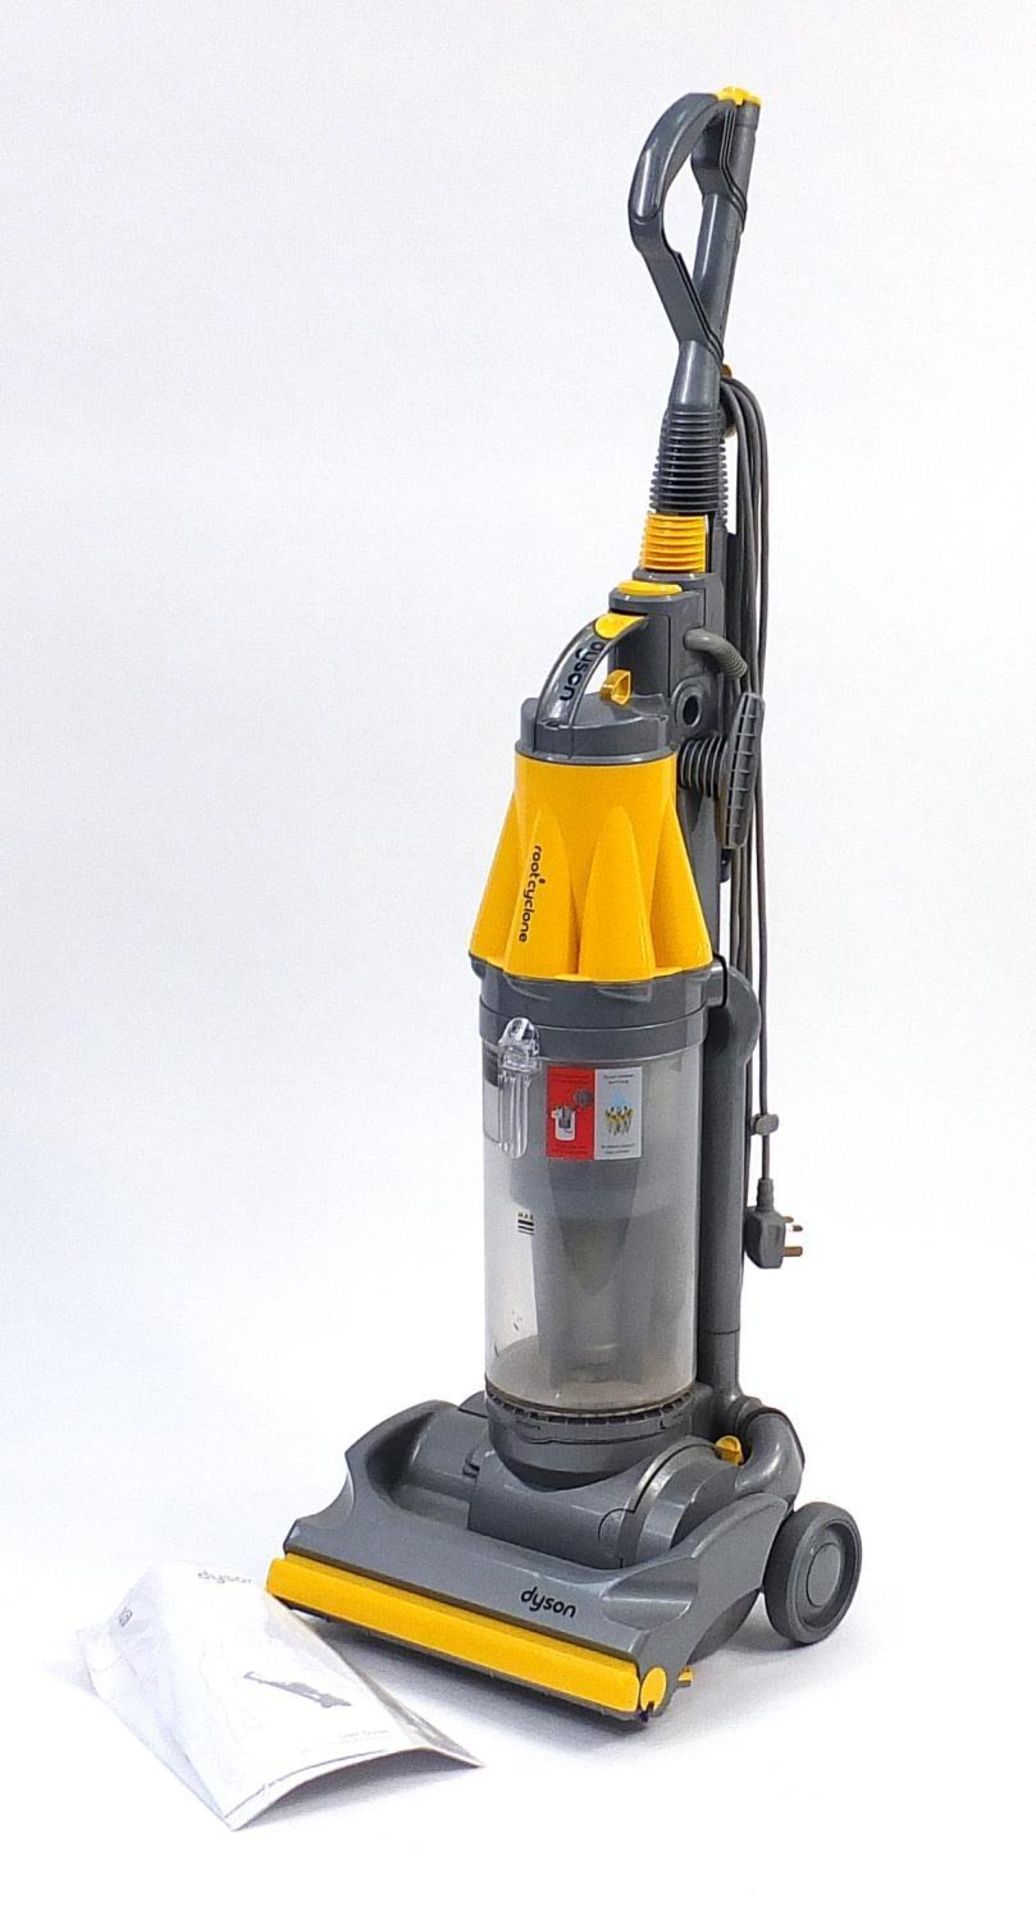 Dyson DC07 upright vacuum cleaner